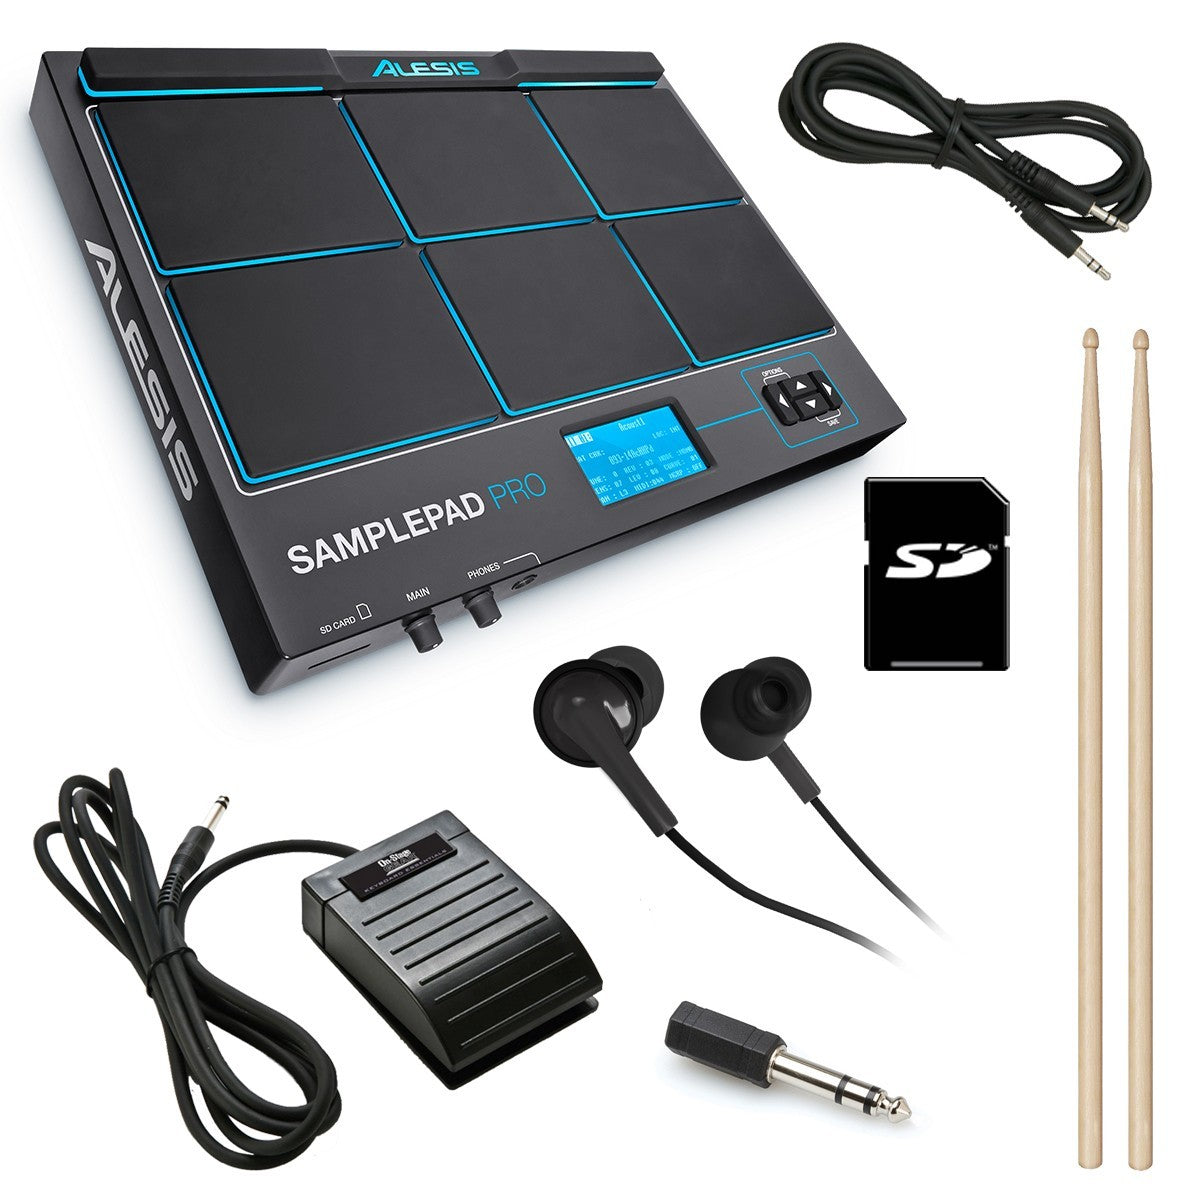 Alesis Sample Pad Pro Percussion Pad With Onboard Sound Storage